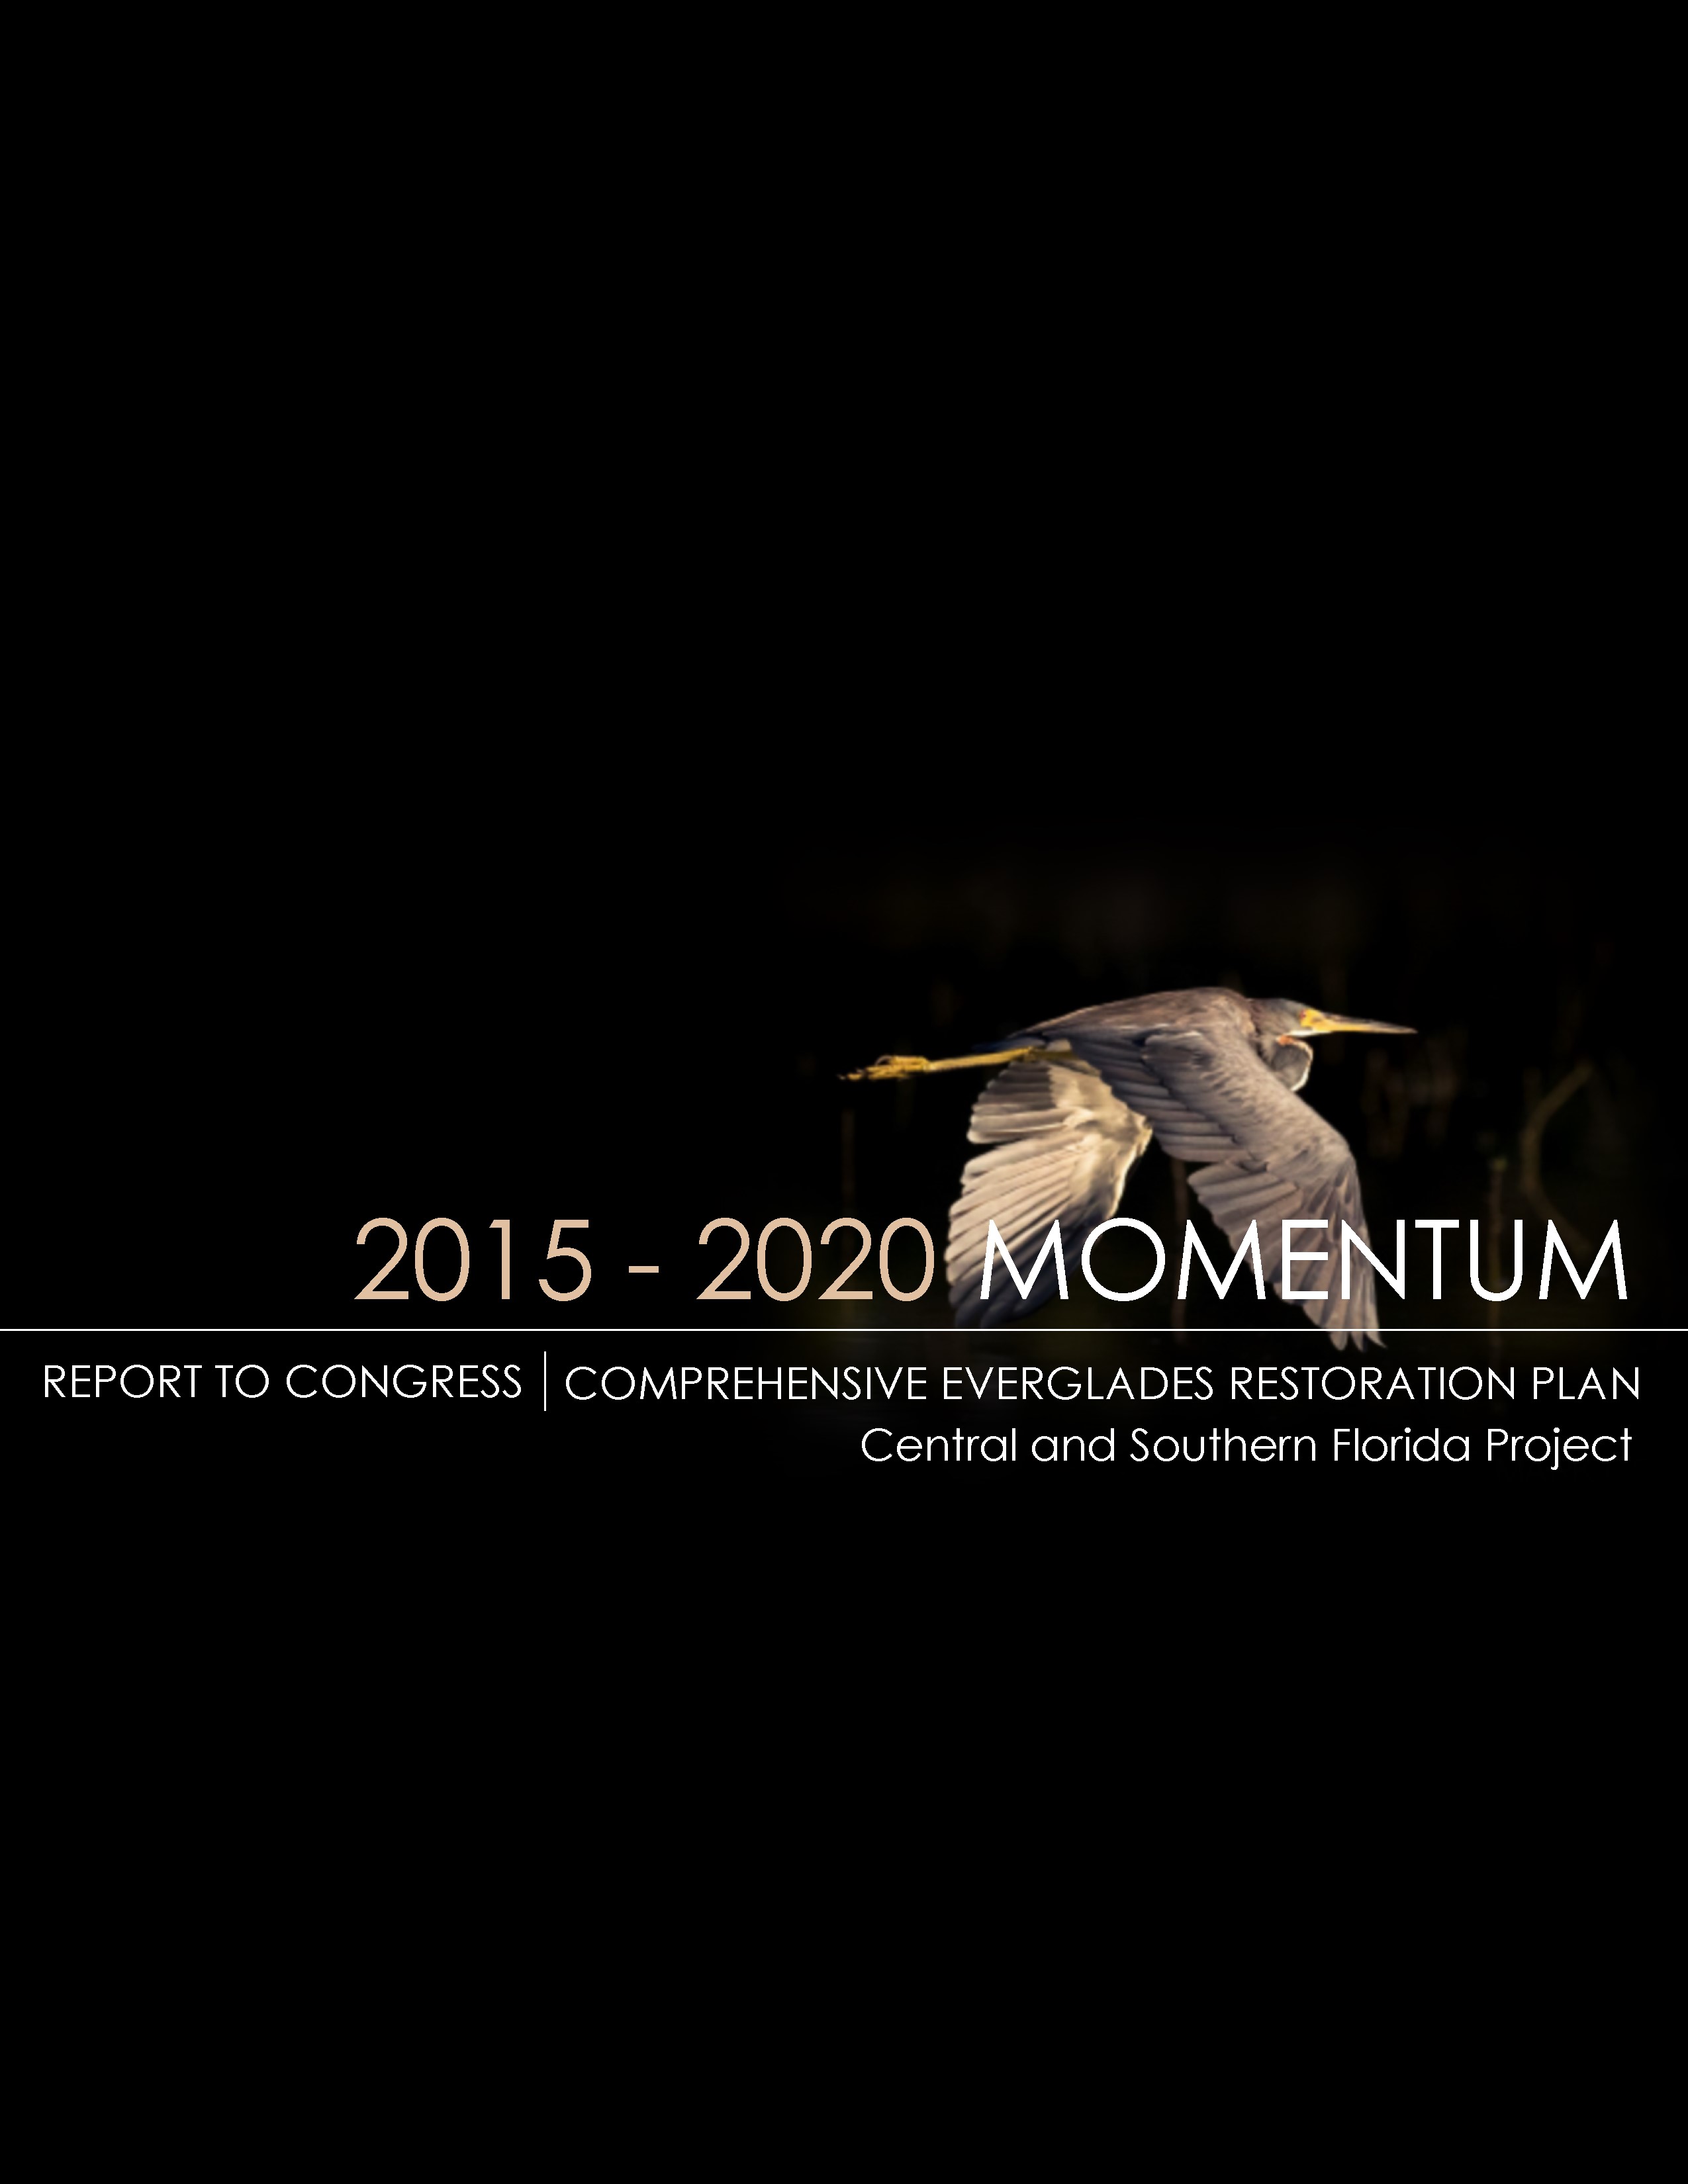 Image of the cover of the 2015 - 2020 Report to Congress - Comprehensive Everglades Restoration Plan